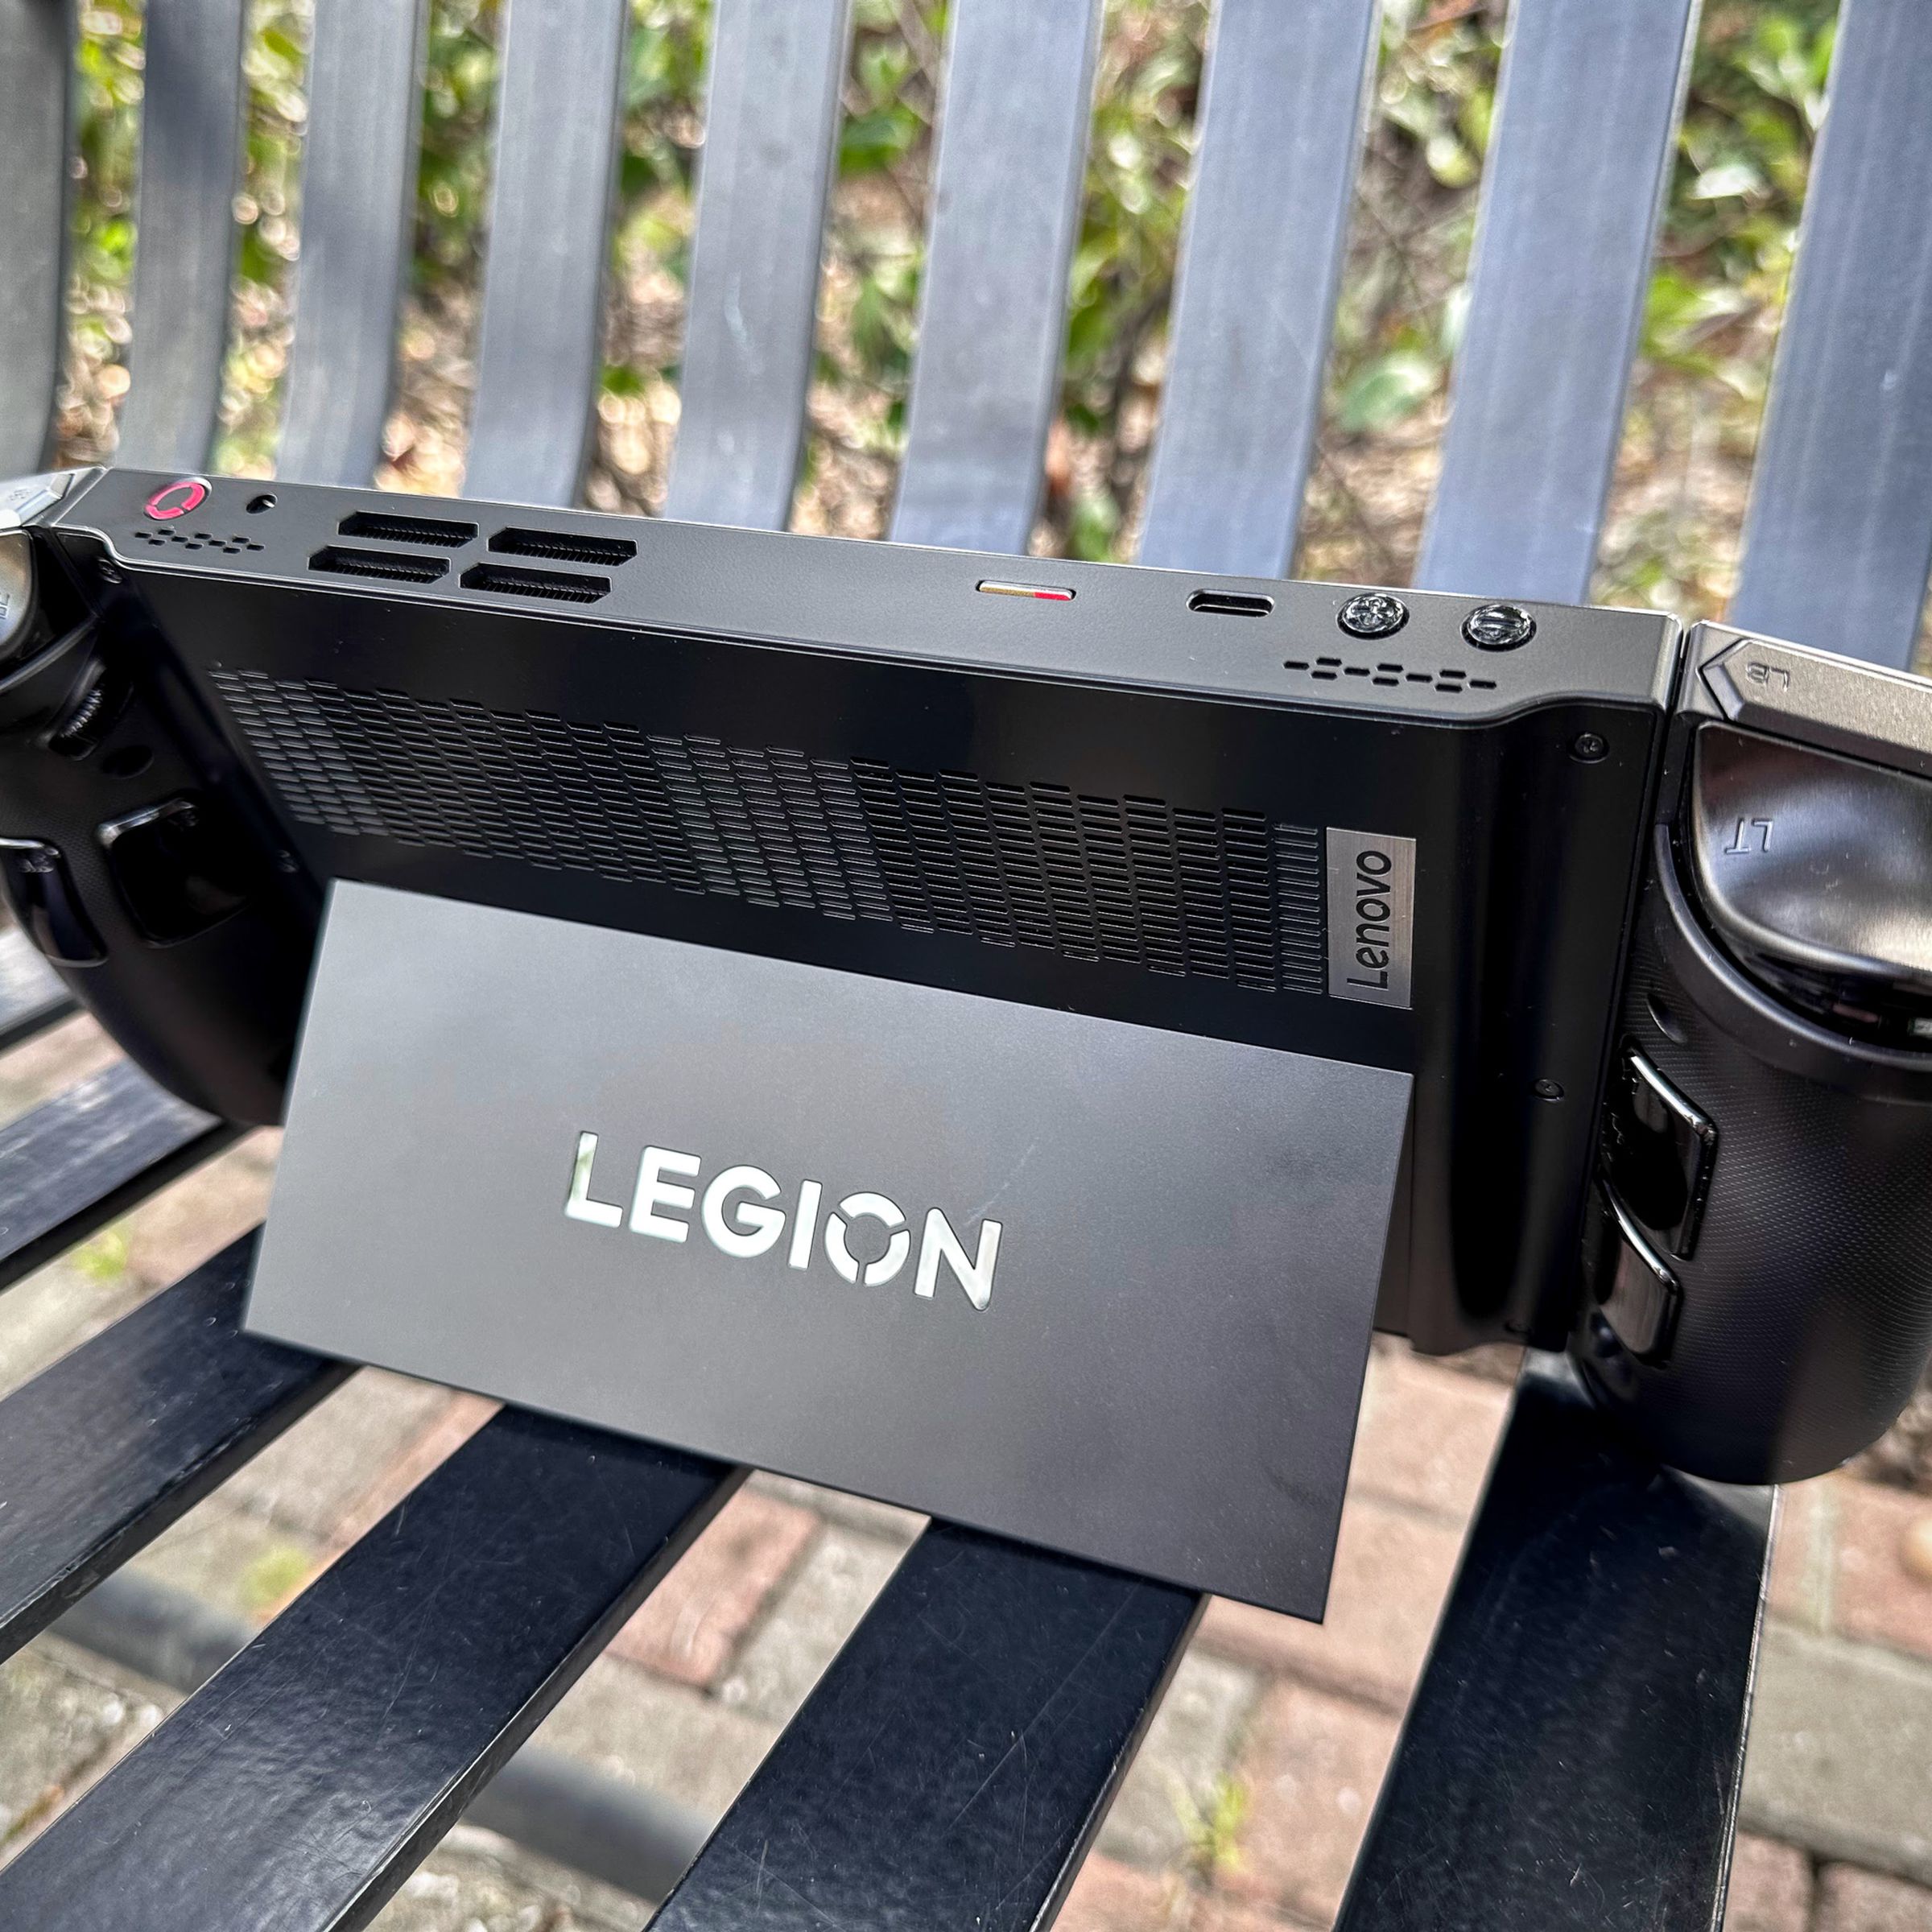 The Lenovo Legion Go, with its controllers attached and its kickstand unfolded.